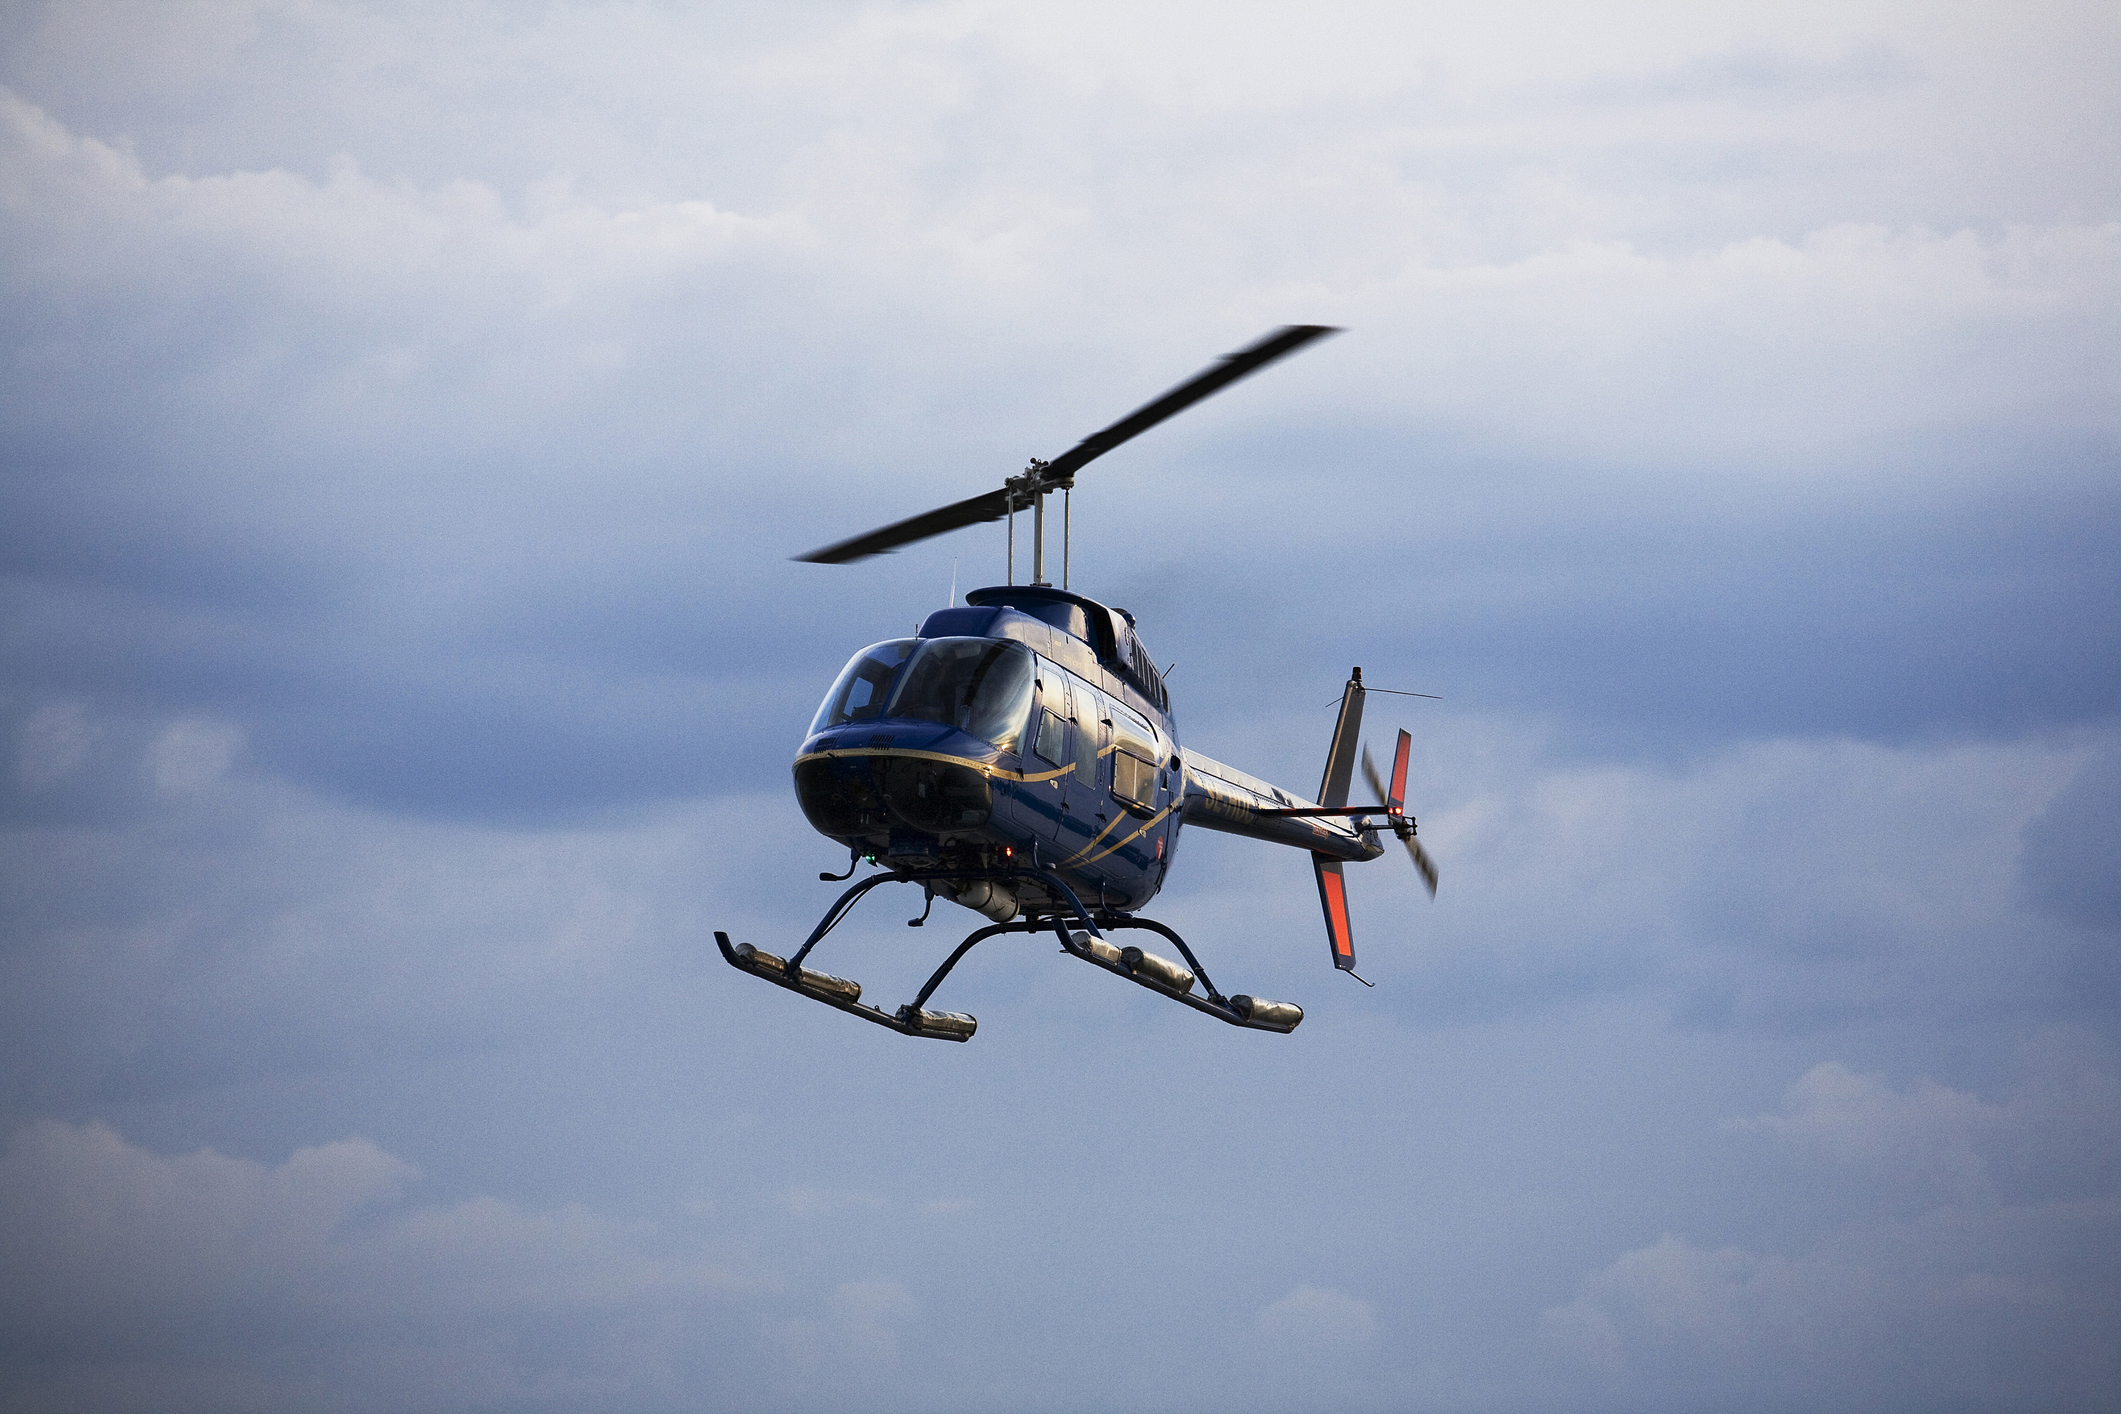 Helicopter in flight against a cloudy sky